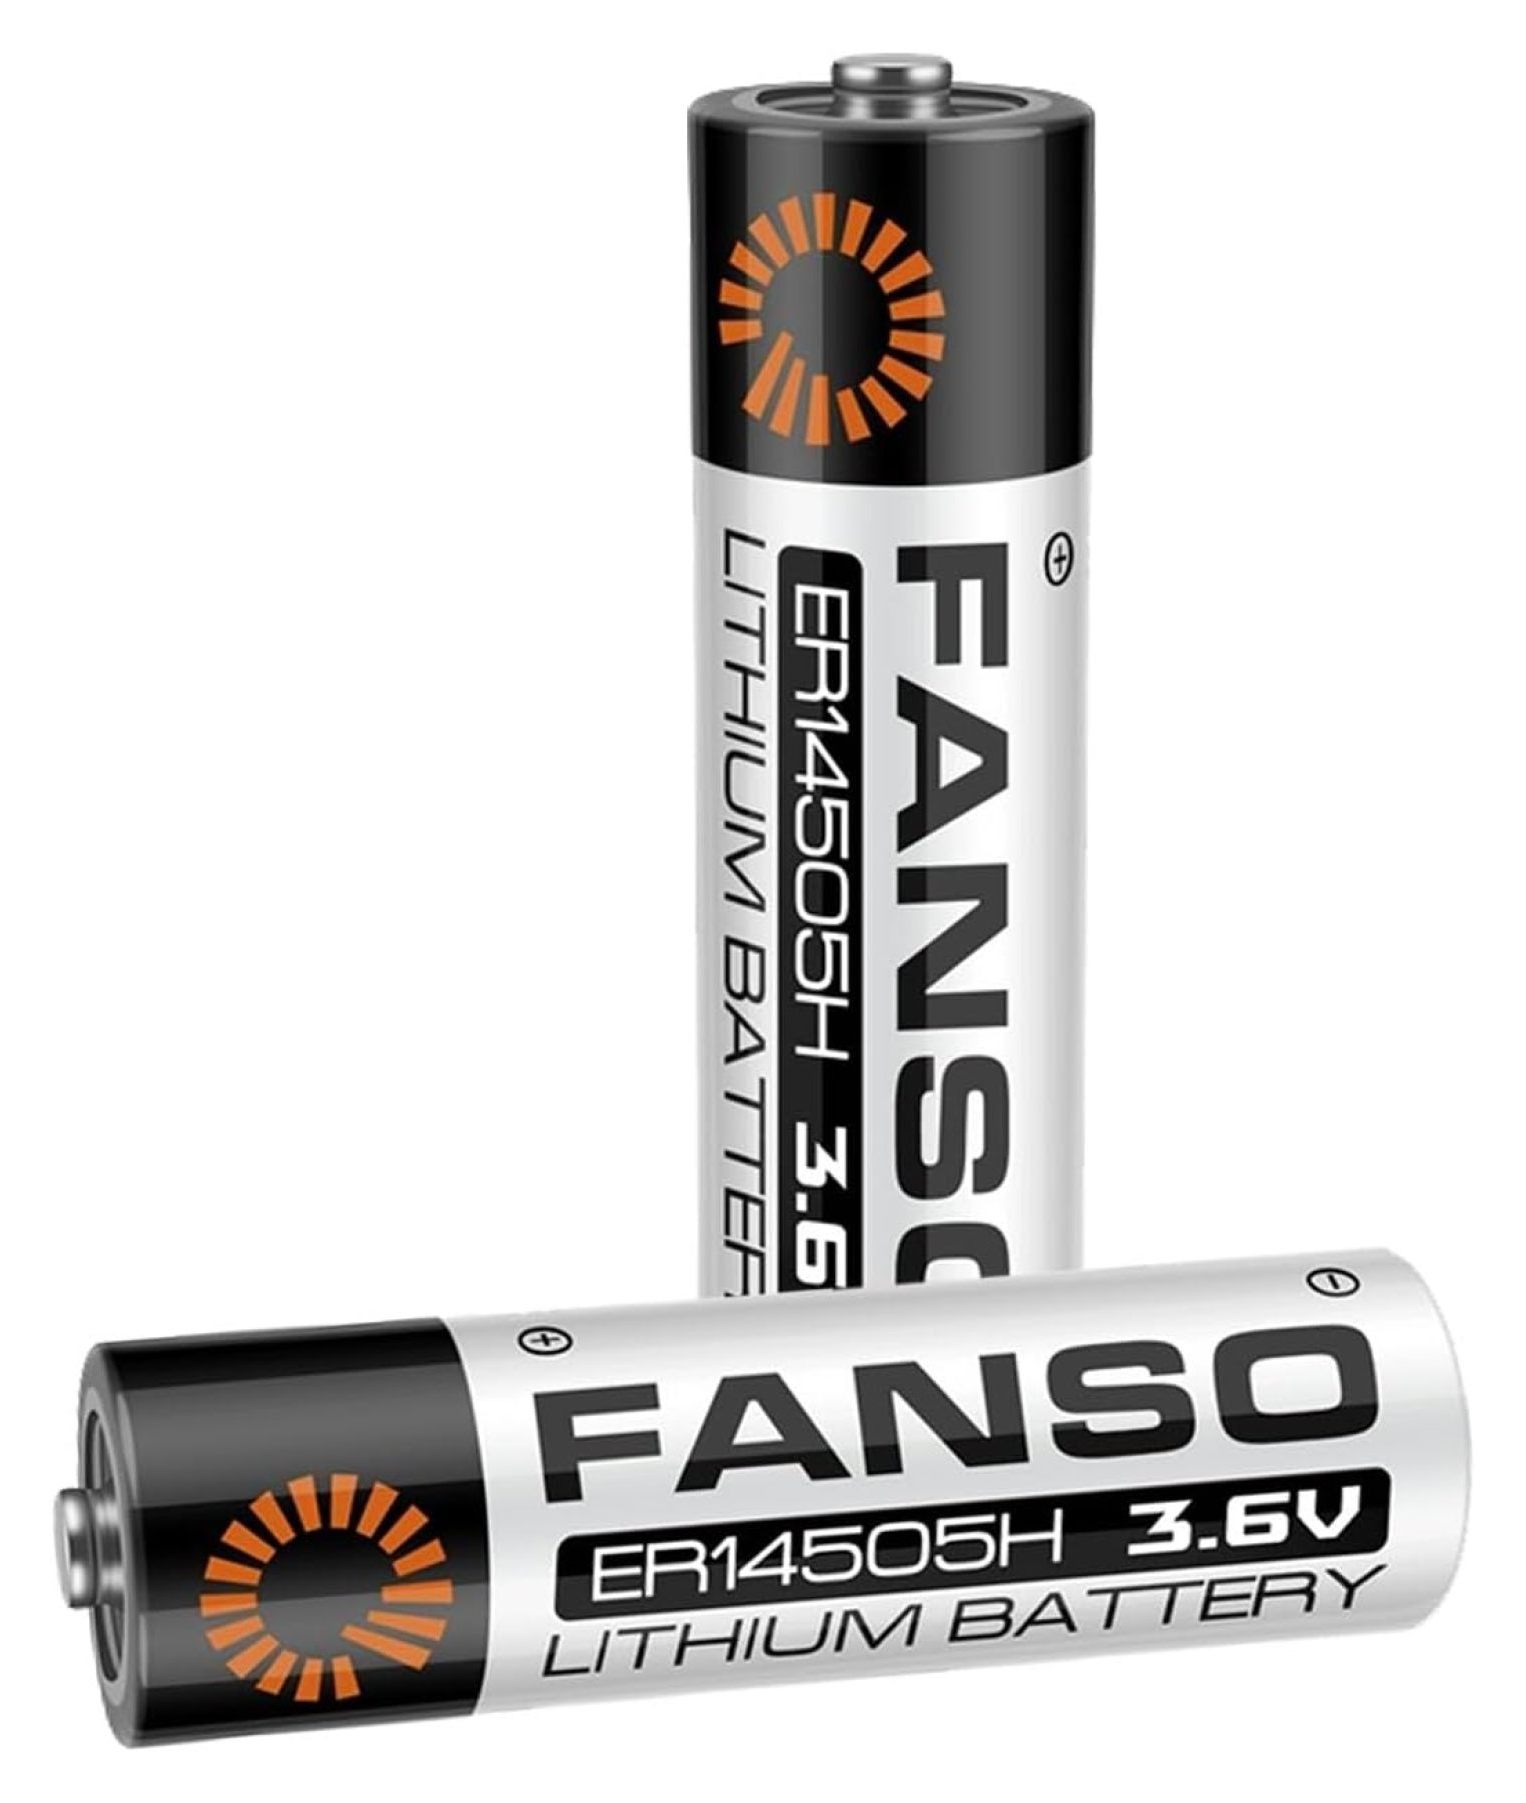 BULYAXIA 2 Pack FANSO ER14505H 3.6V Lithium Battery 2700mAh ER14505 LS14500 Li-SOCL₂ Non-Rechargeable Battery - image 1 of 5